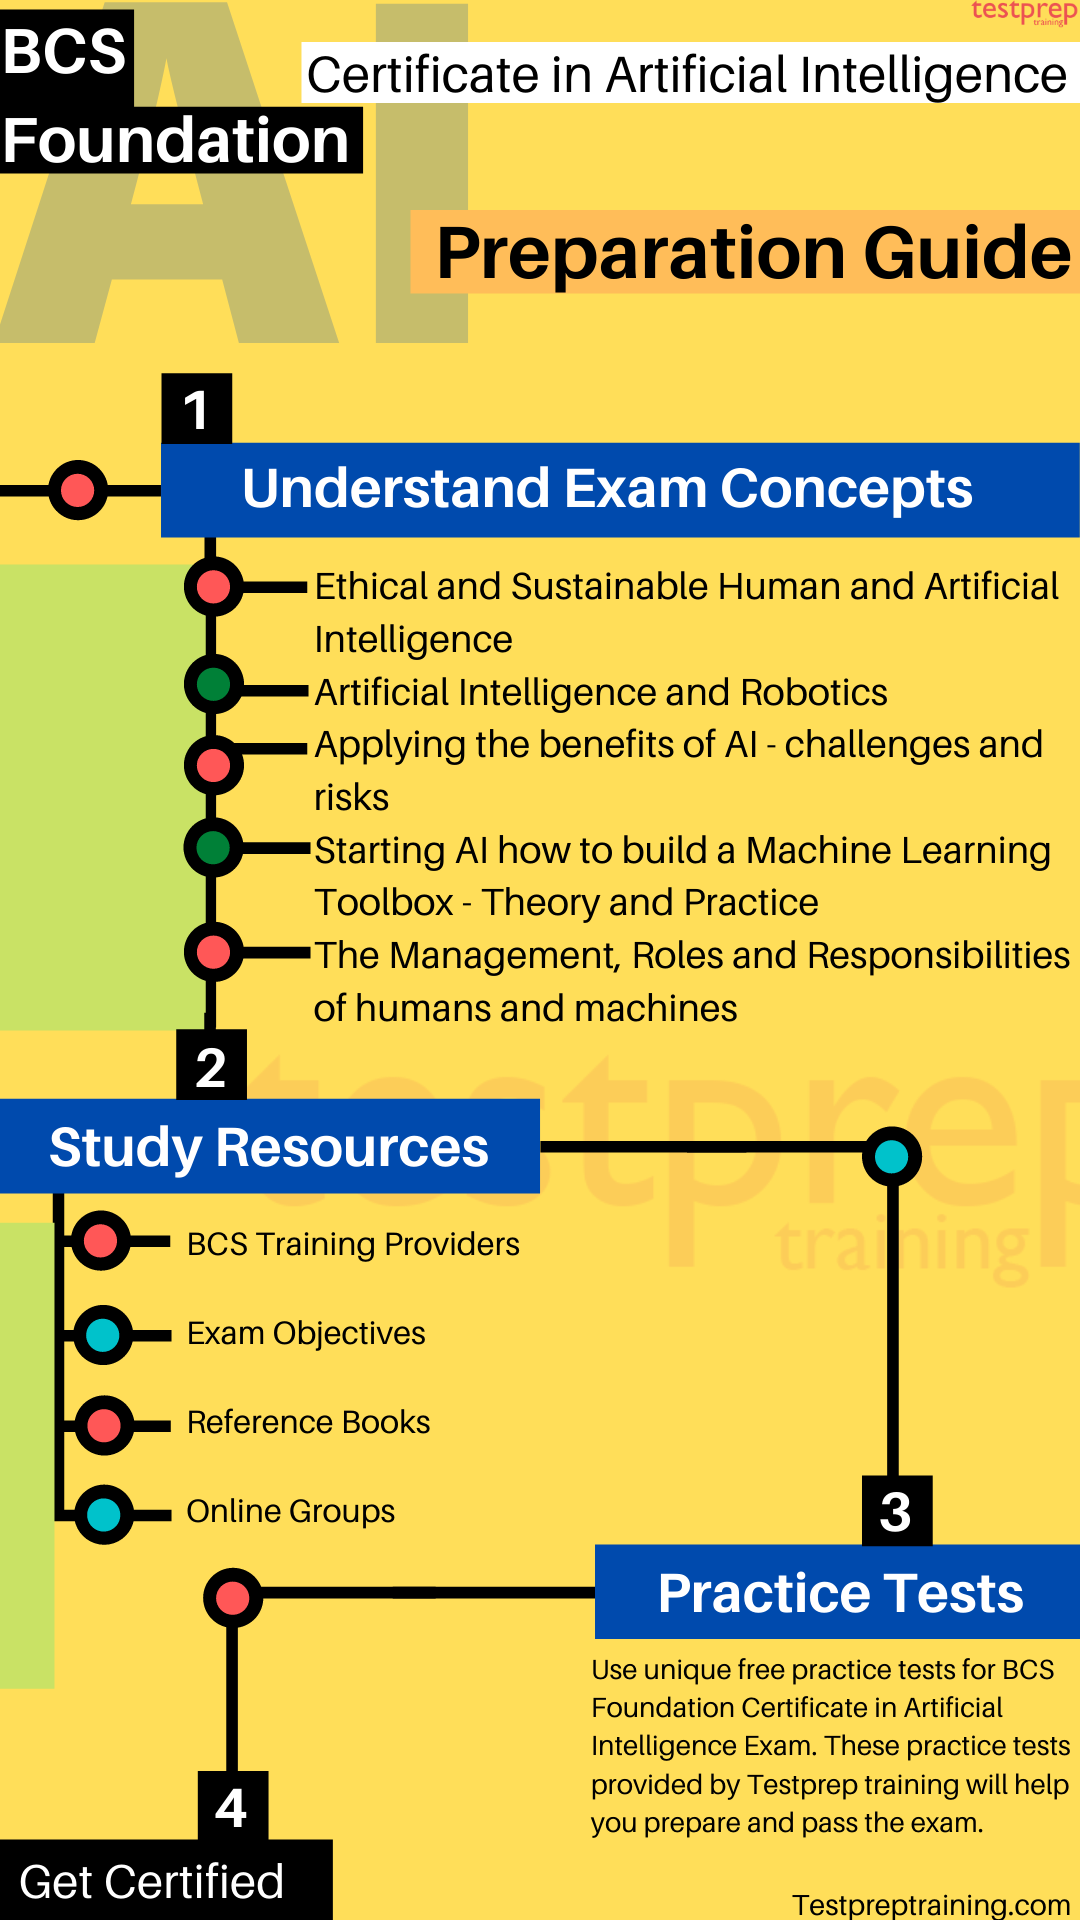 BCS Foundation Certificate in Artificial Intelligence Exam study guide